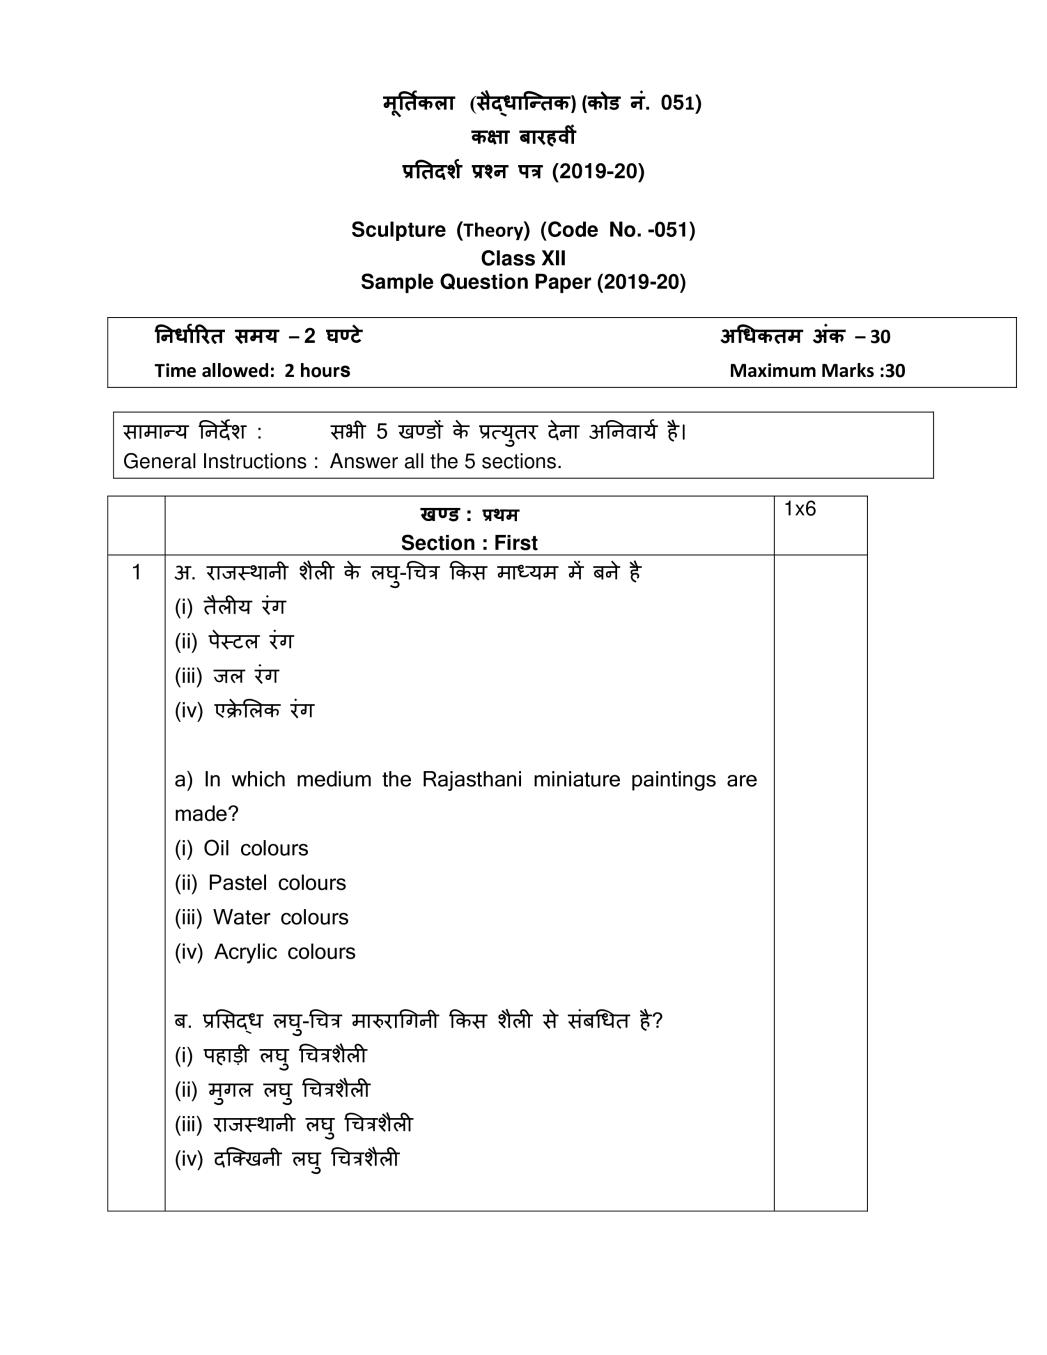 CBSE Class 12 Sample Paper 2020 for Sculpture - Page 1